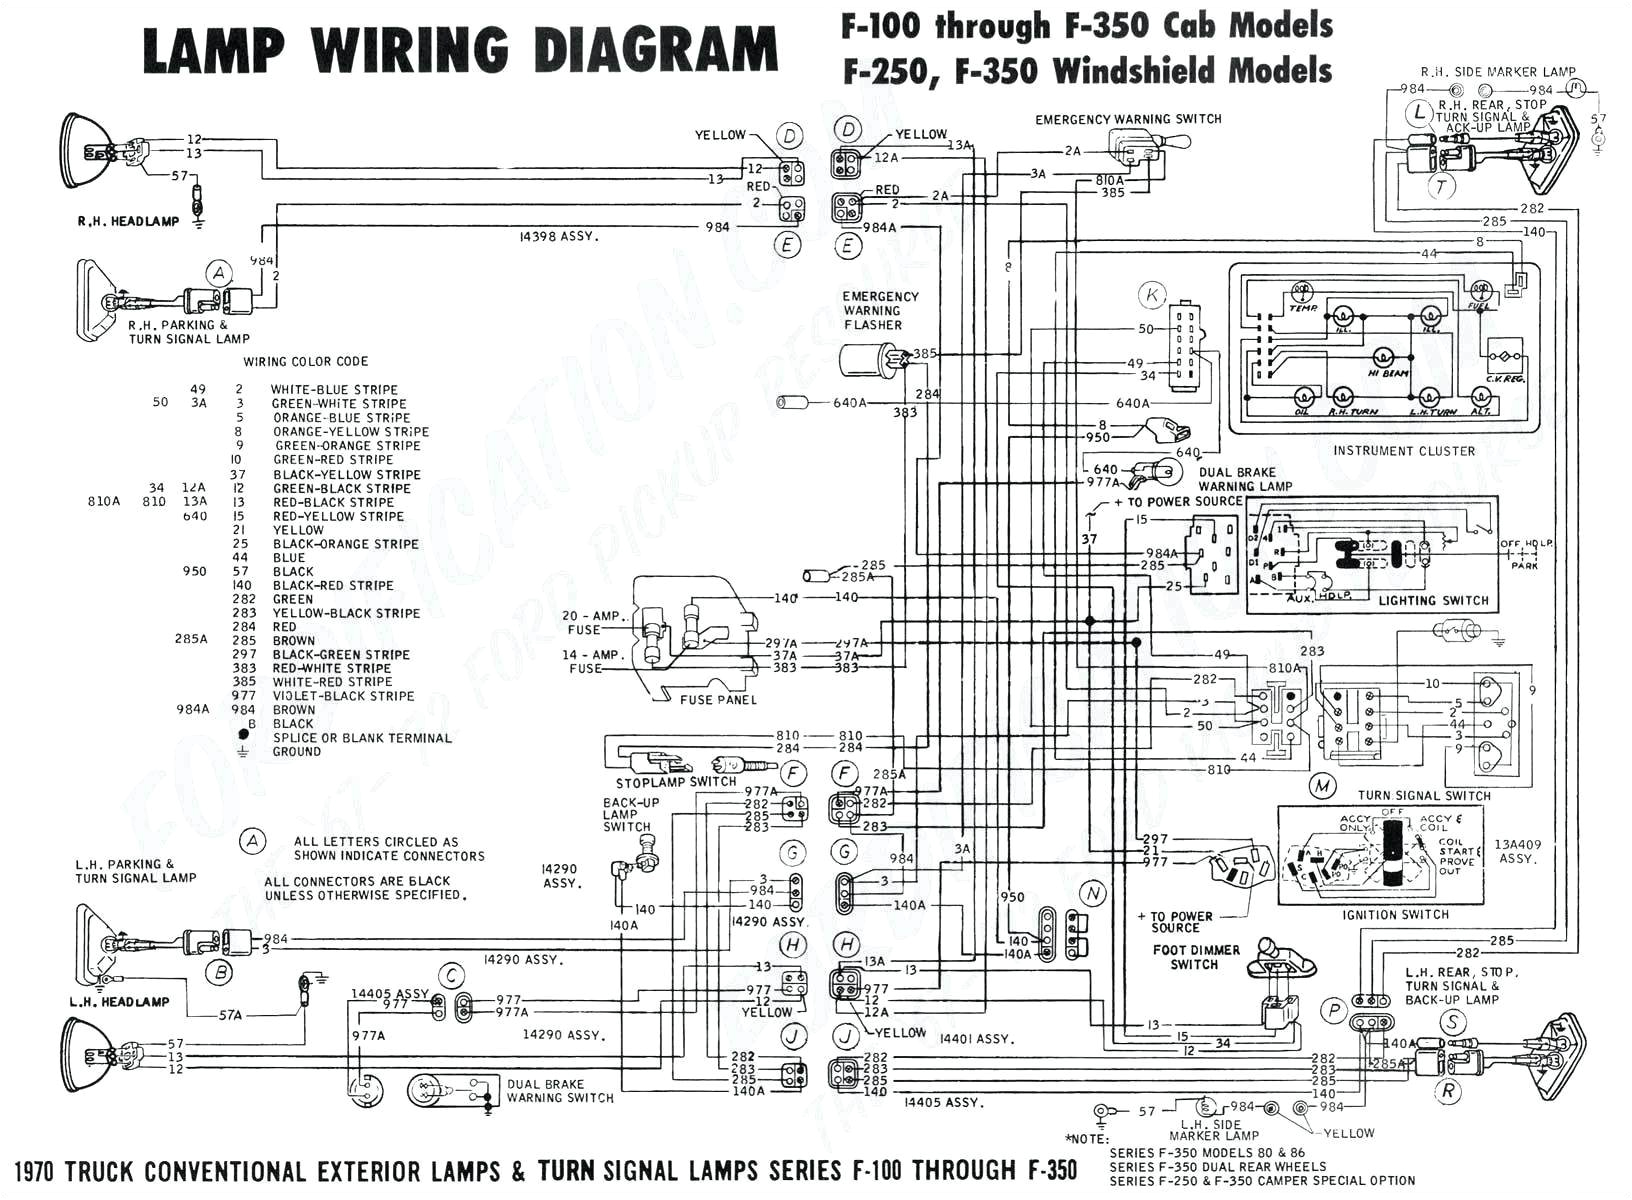 1946 buick wiring diagram schematic online manuual of wiring diagram champion diagram electrical for 19411946 studebaker champion wiring